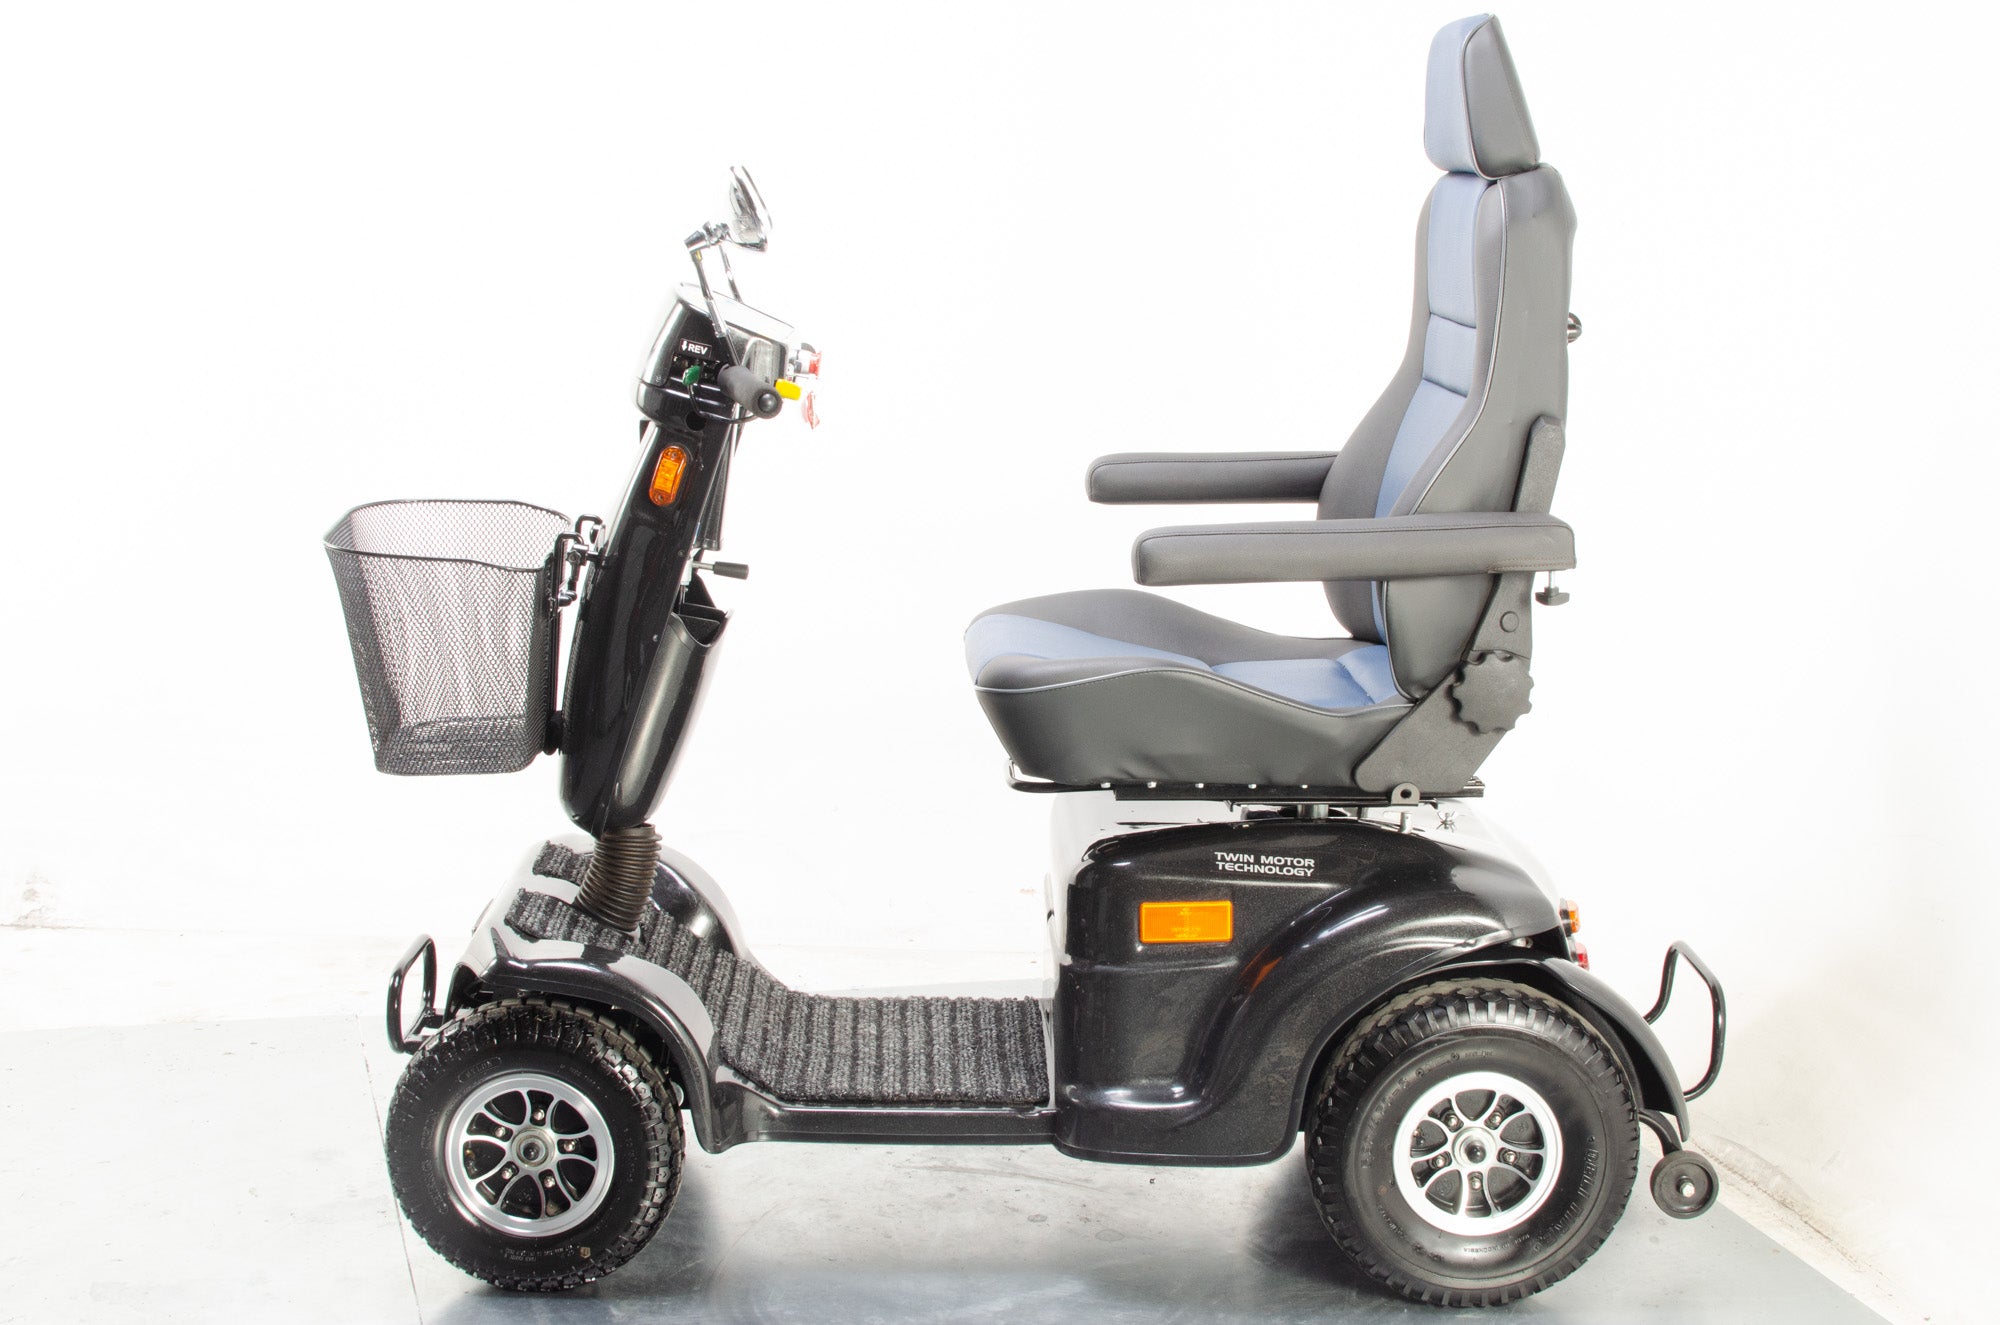 2019 Extreme + Dual motor Electric Mobility Scooter from Scooter Tech Large All Terrain Black